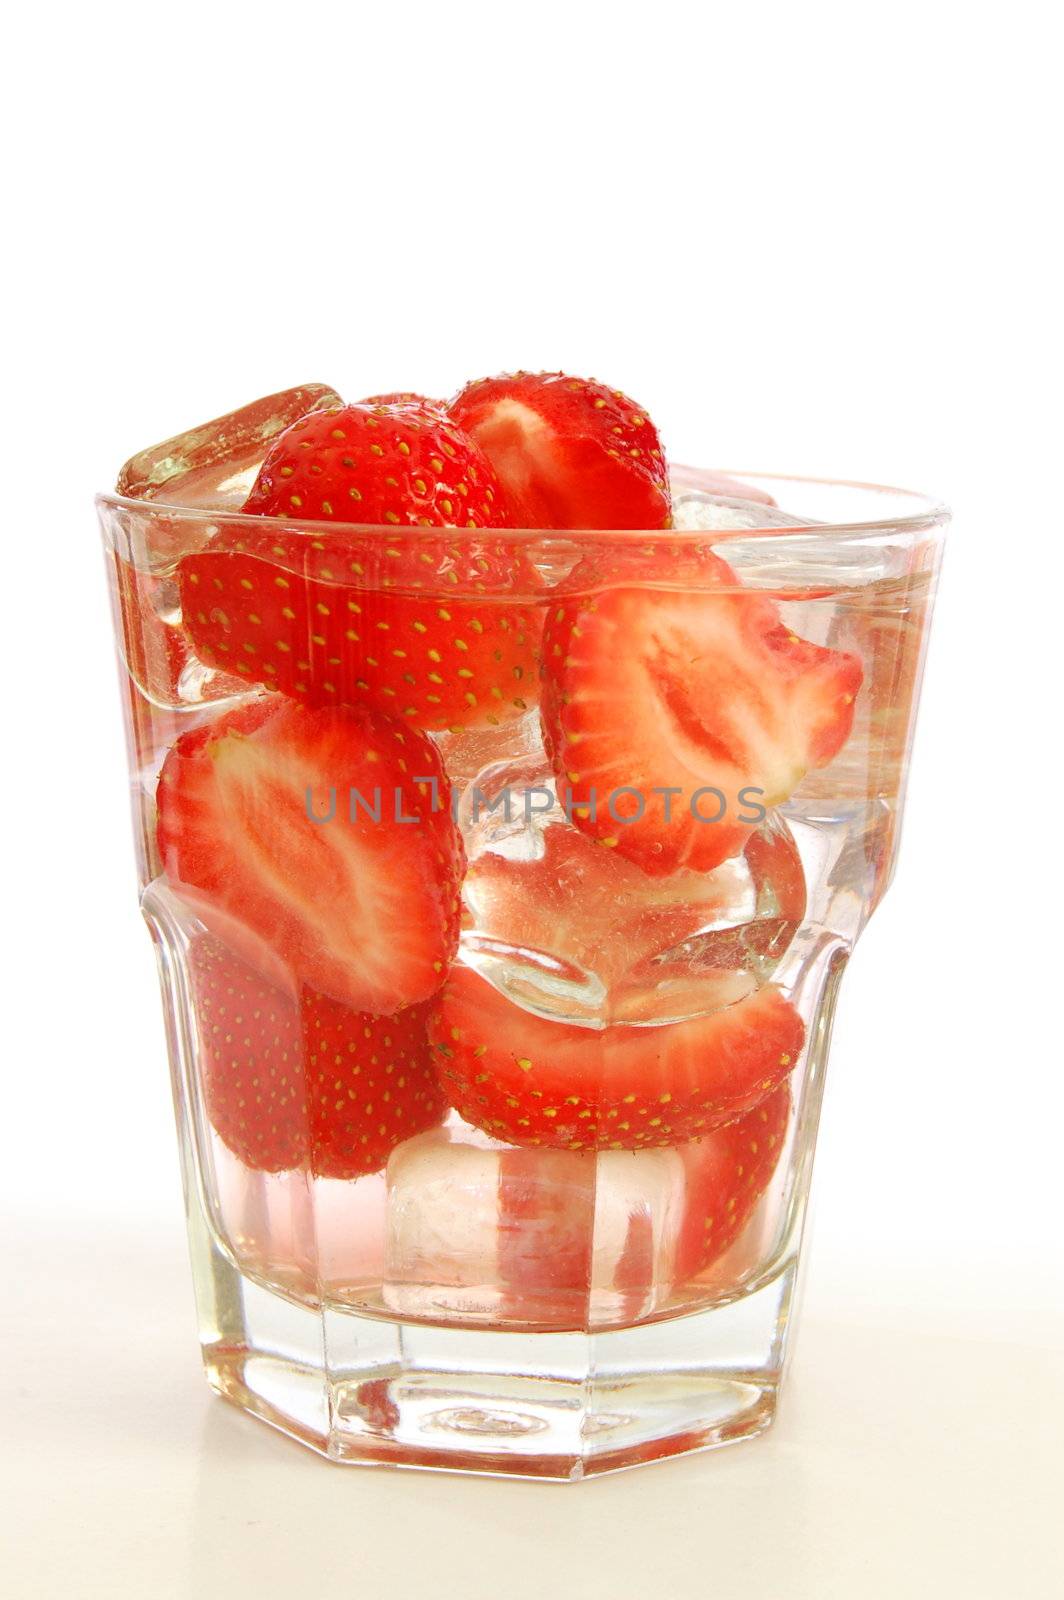 strawberry strawberry juice or cocktail drink on a summer party